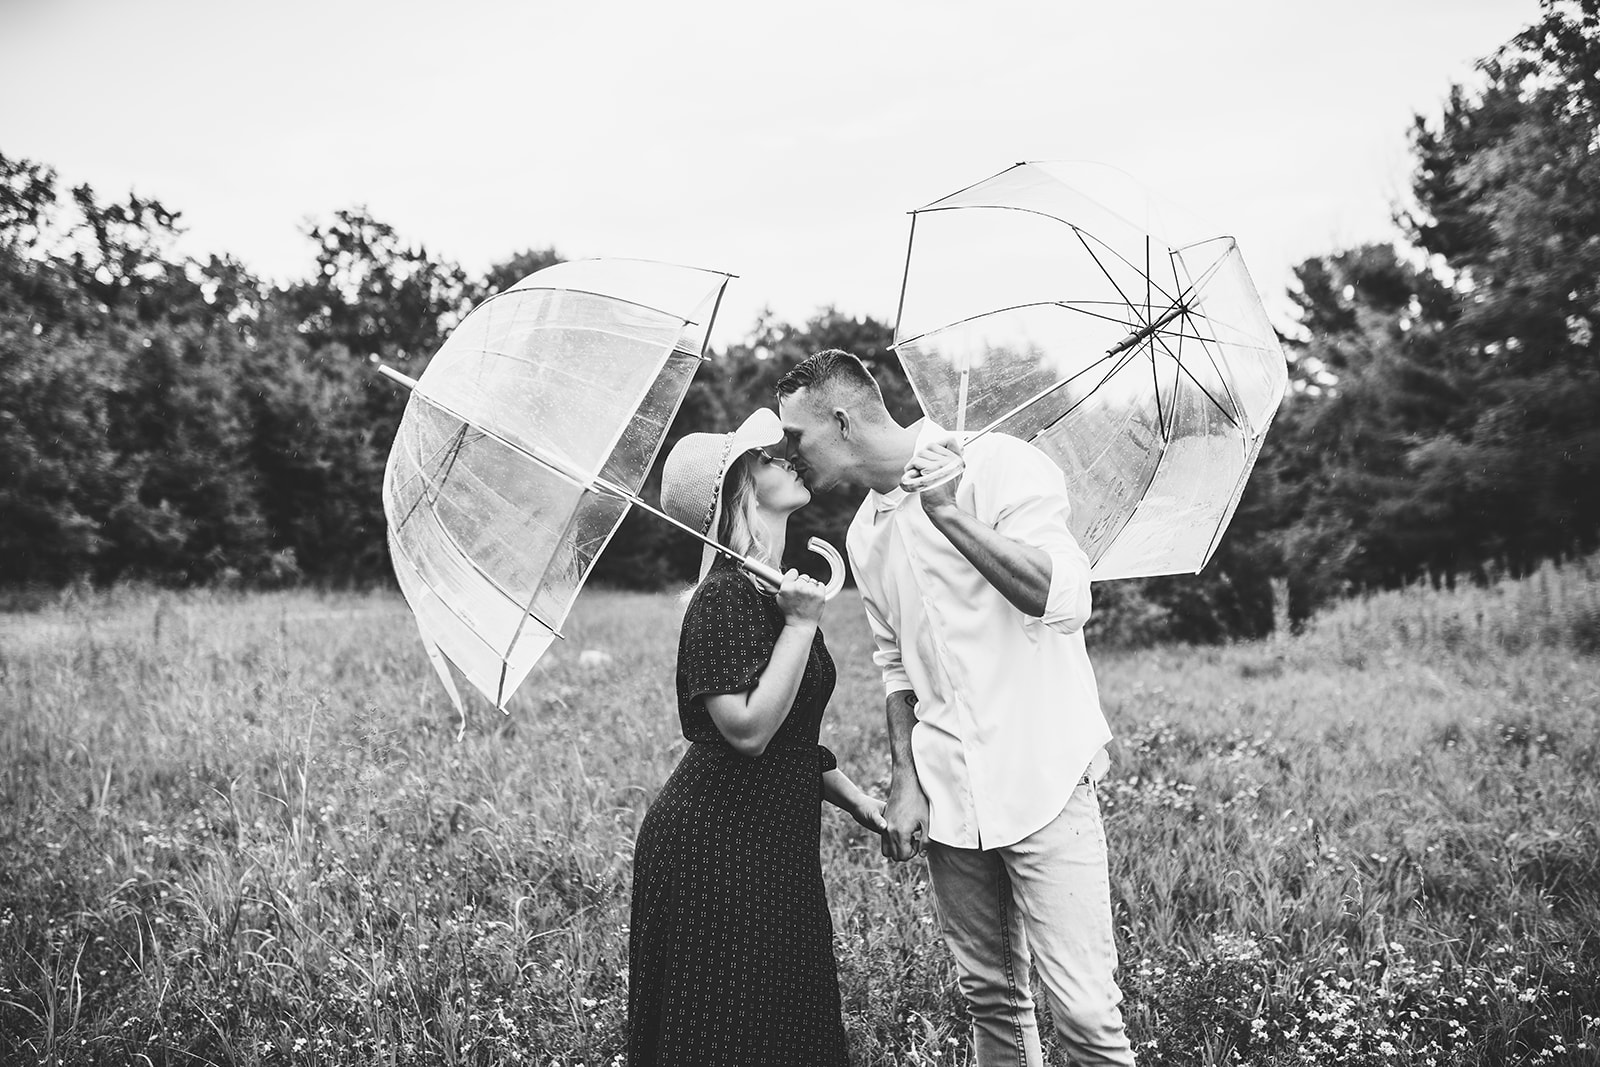 A newlywed couple shares a romantic kiss beneath two clear umbrellas, sheltered from the gentle rain. Their love radiates as they embrace, surrounded by the subtle beauty of the rainy day.